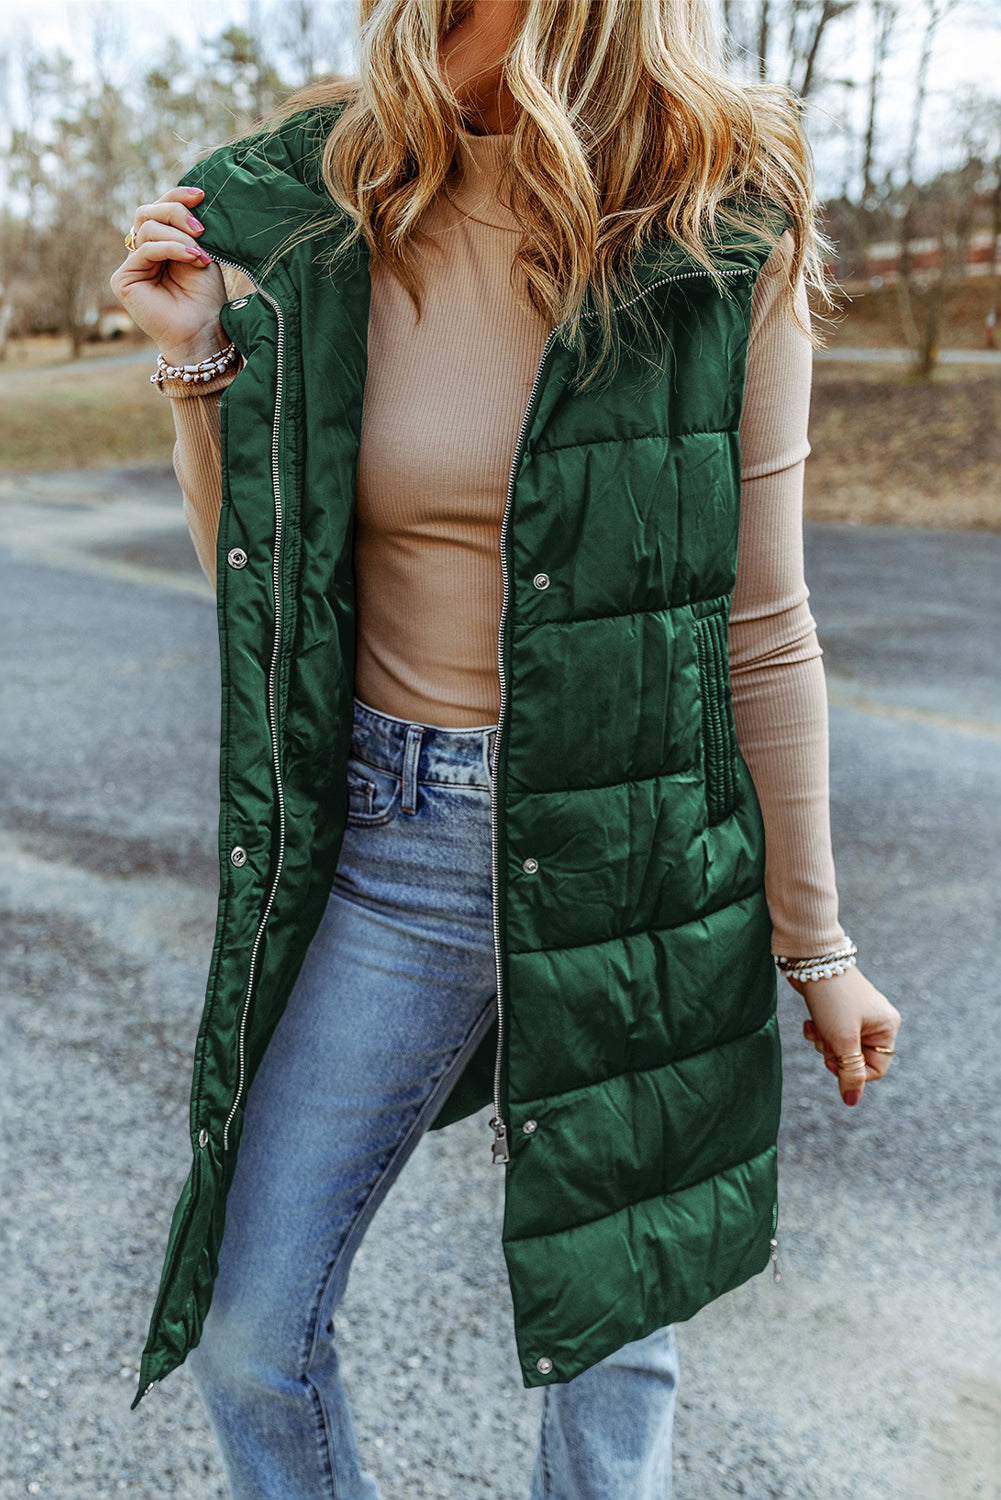 Green 100%Polyamide - Green Hooded Long Quilted Vest Coat - 2 colors - women's coat at TFC&H Co.